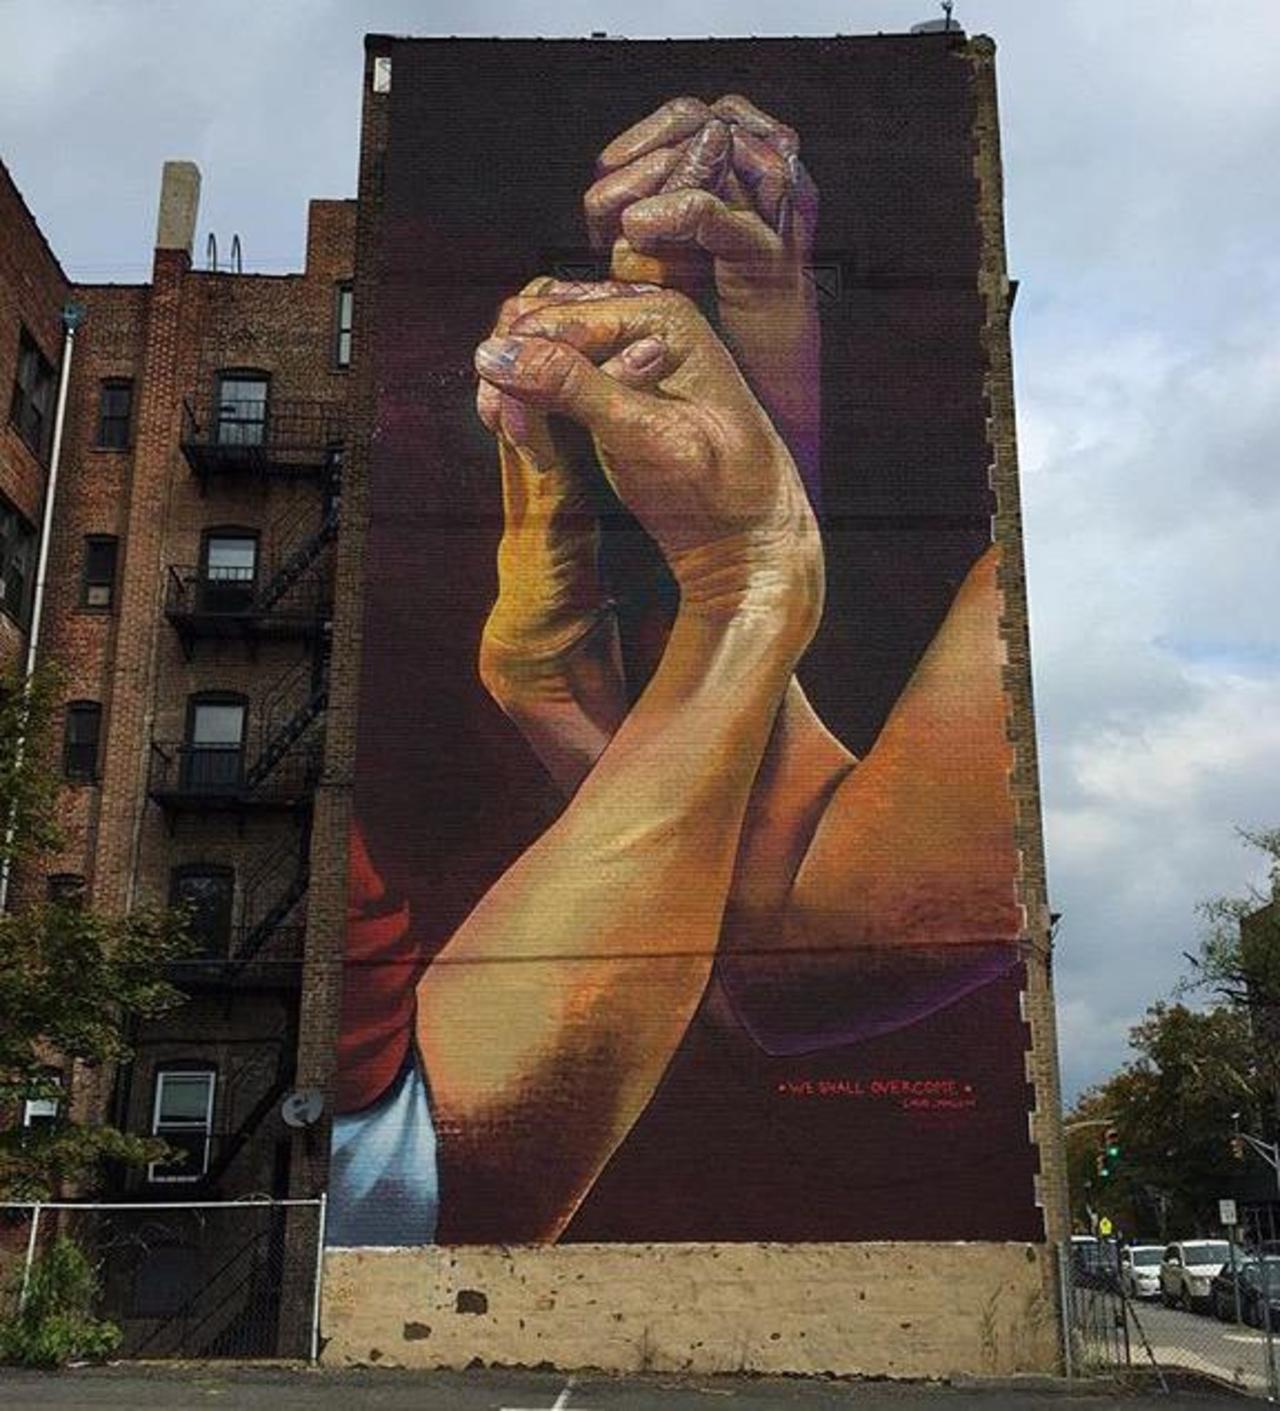 New Street Art by CaseMaclaim in Jersey City for the TheBKcollective 

#art #graffiti #mural #streetart http://t.co/Q9foBezK7G